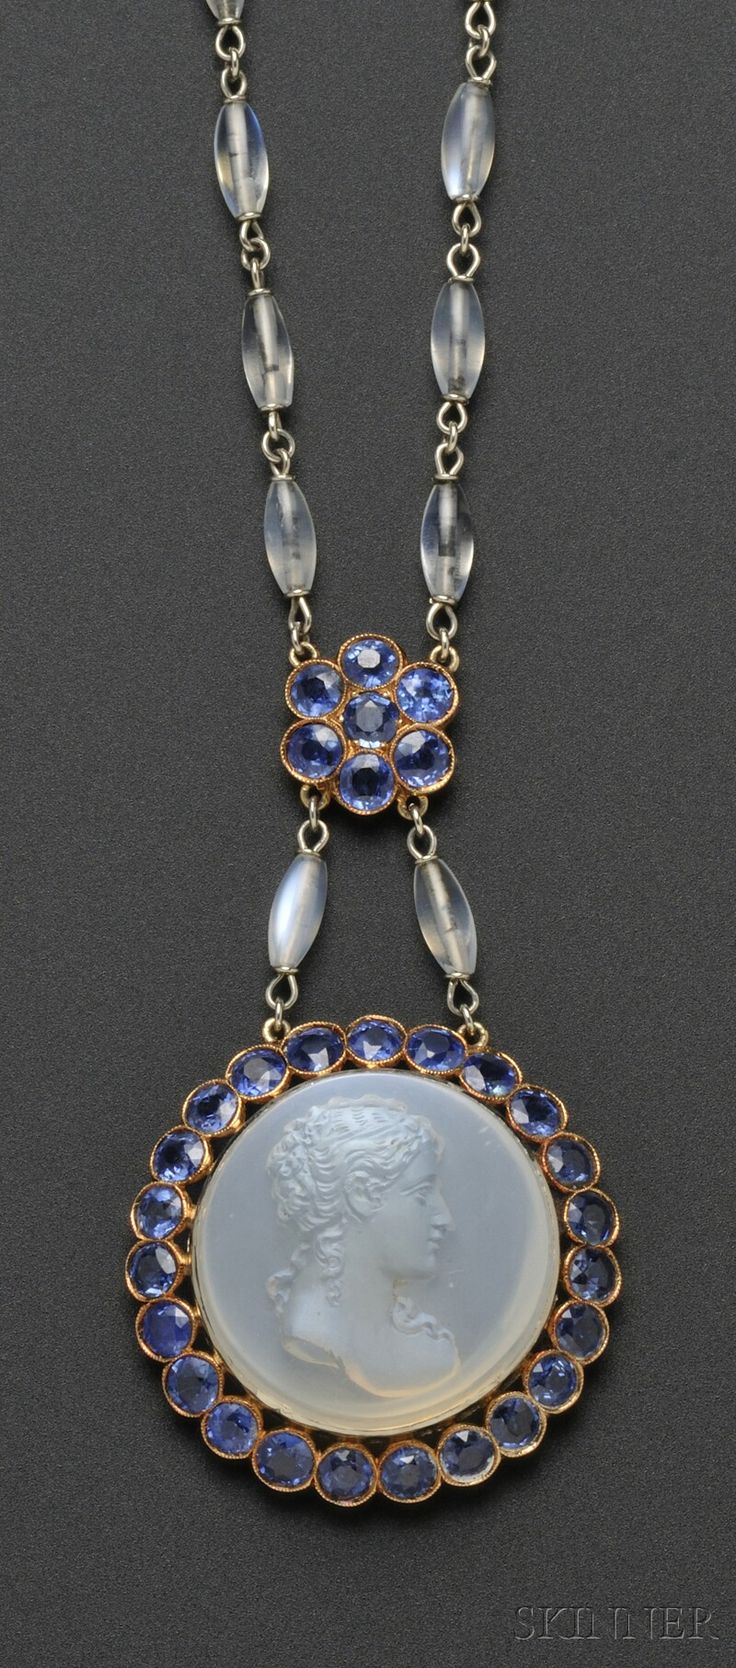 Moonstone cameo, moonstone, sapphire and gold necklace, circa 1920.